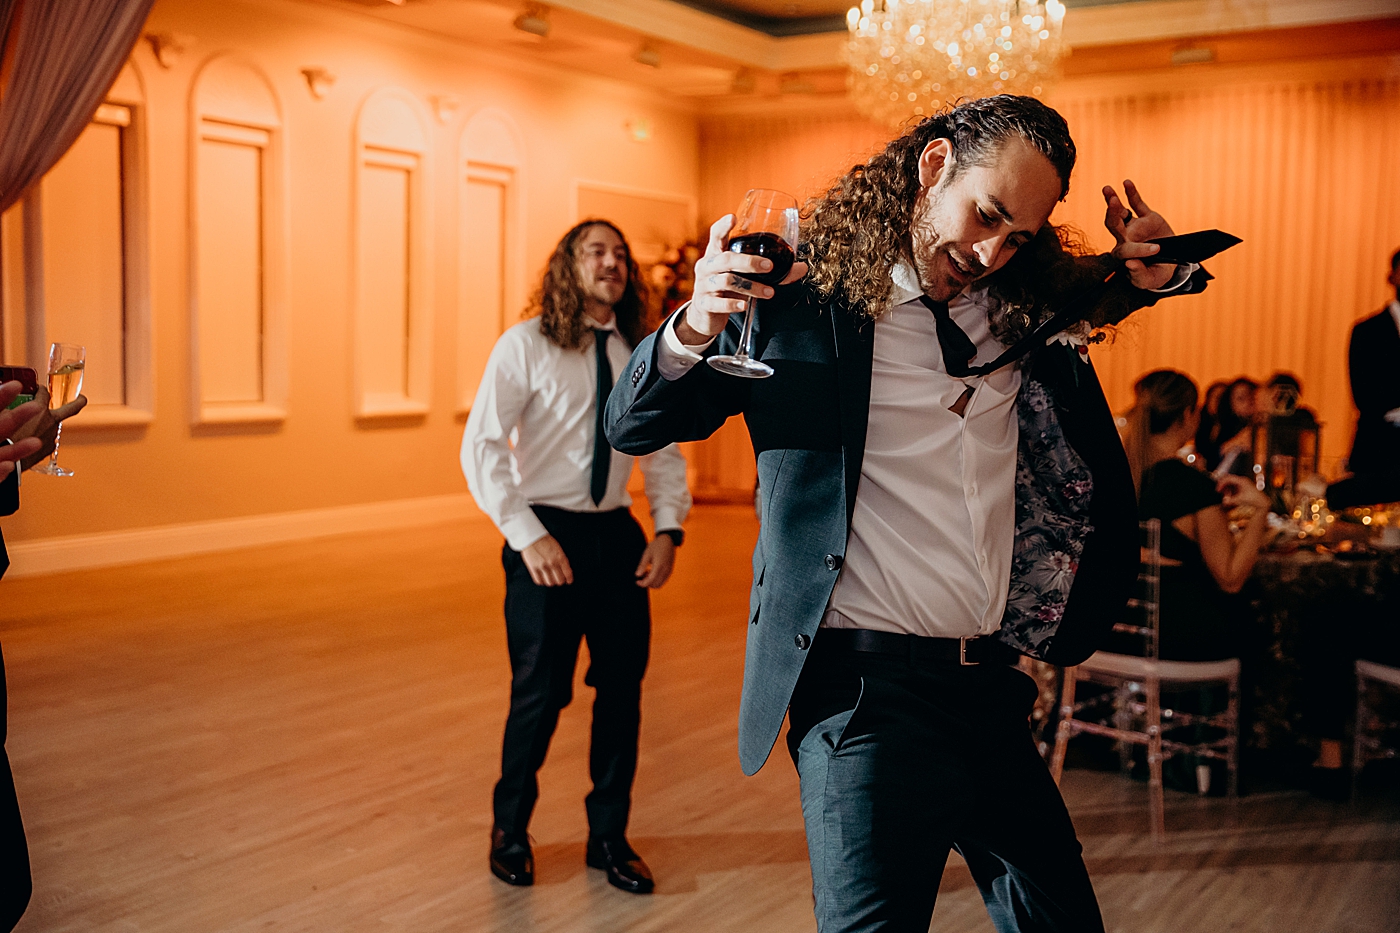 Groom dancing with glass of red wine at reception Benvenuto Restaurant Wedding Photography captured by South Florida Wedding Photographer Maggie Alvarez Photography